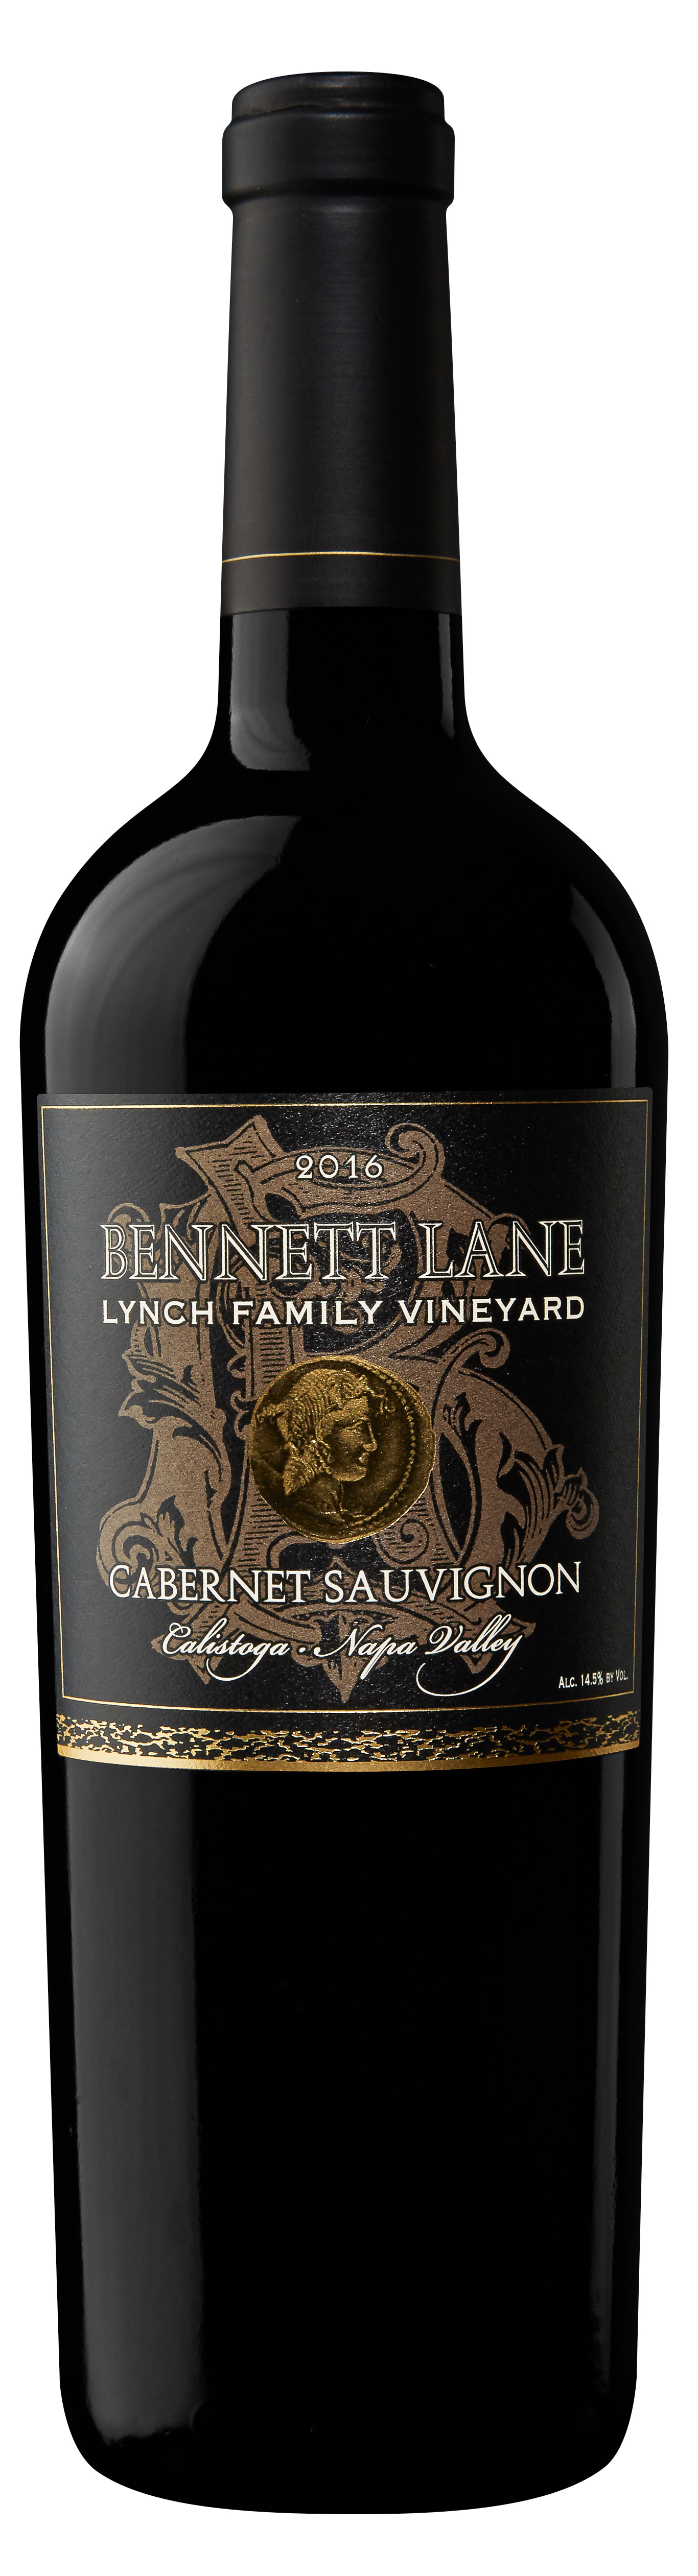 Product Image for 2020 Lynch Family Vineyard Cabernet Sauvignon